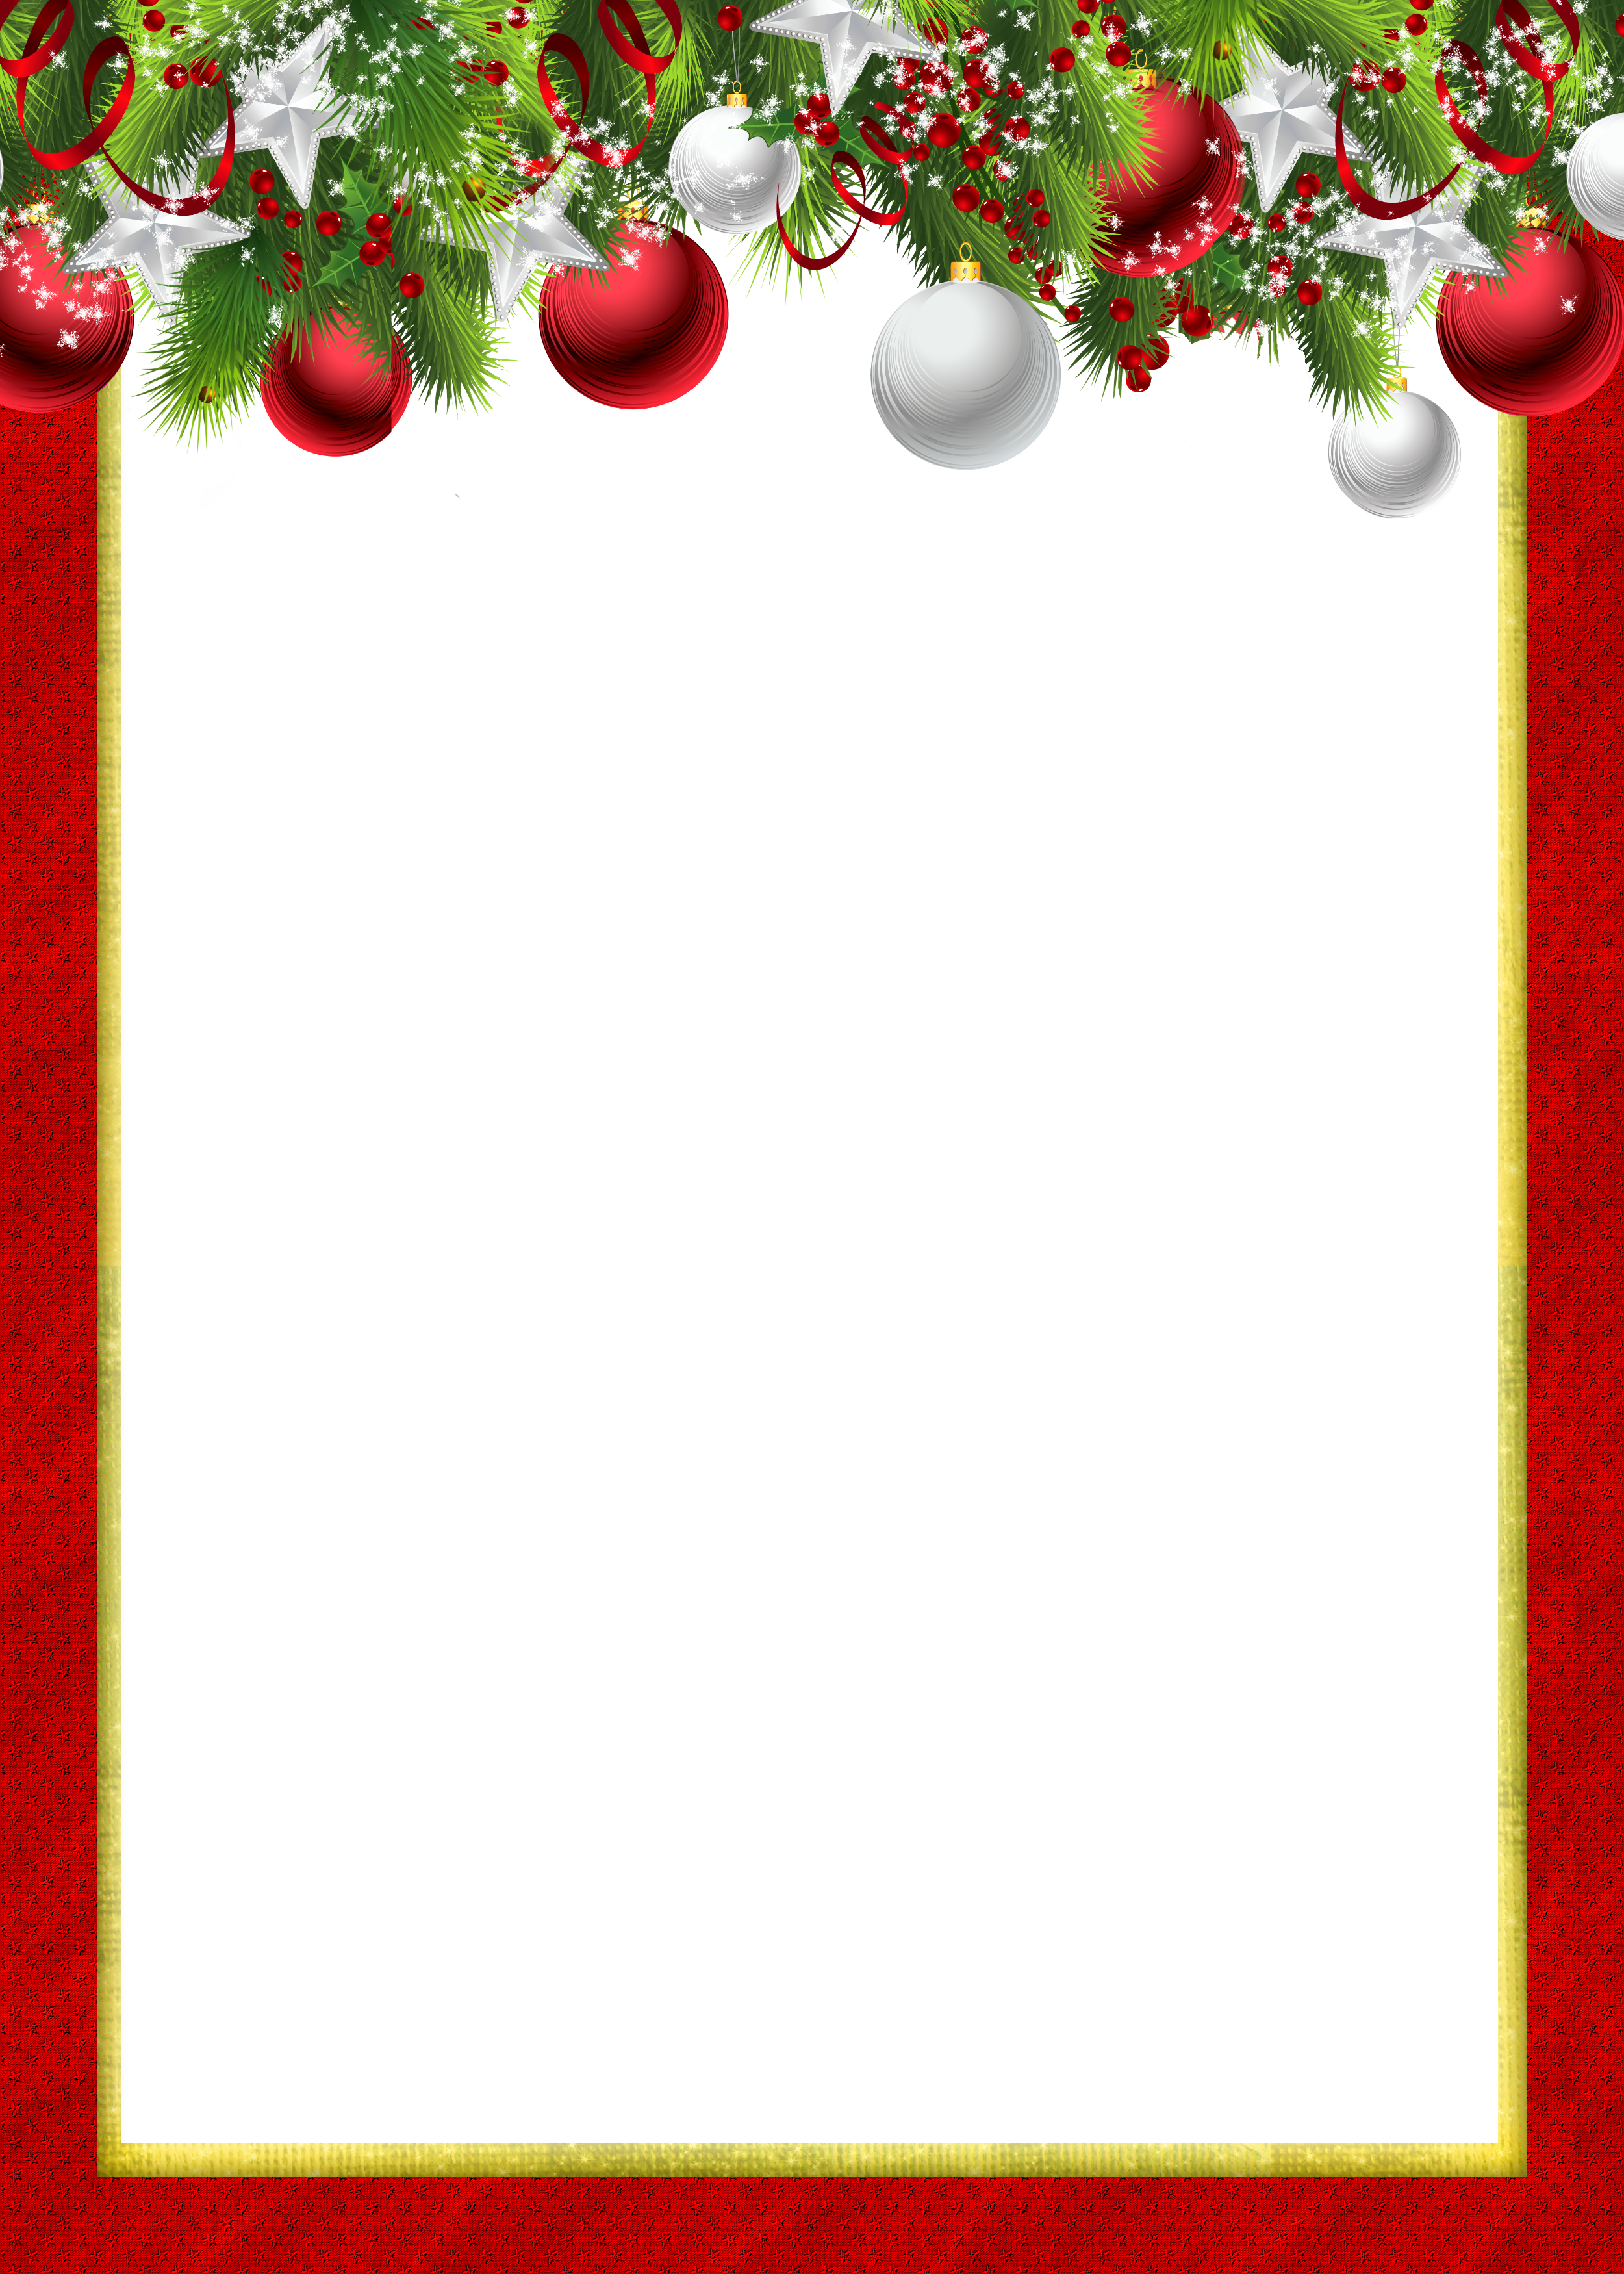 Red Transparent PNG Christmas Frame with Christmas